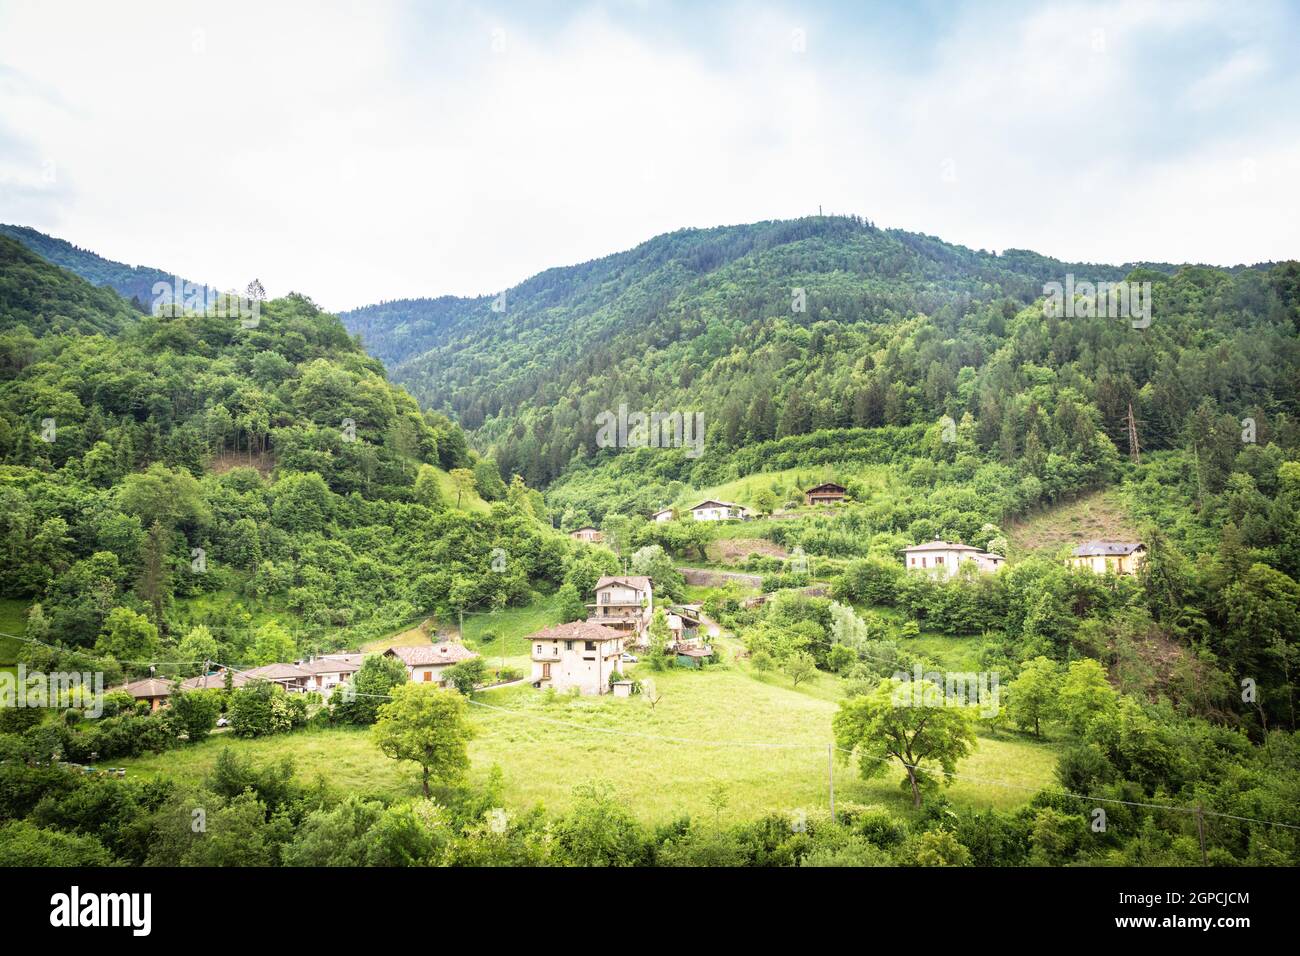 Panoramic natural landscapes with house. Wide-open spaces. Collio, province of Brescia, Val Trompia, Lombardy, Italy. Stock Photo